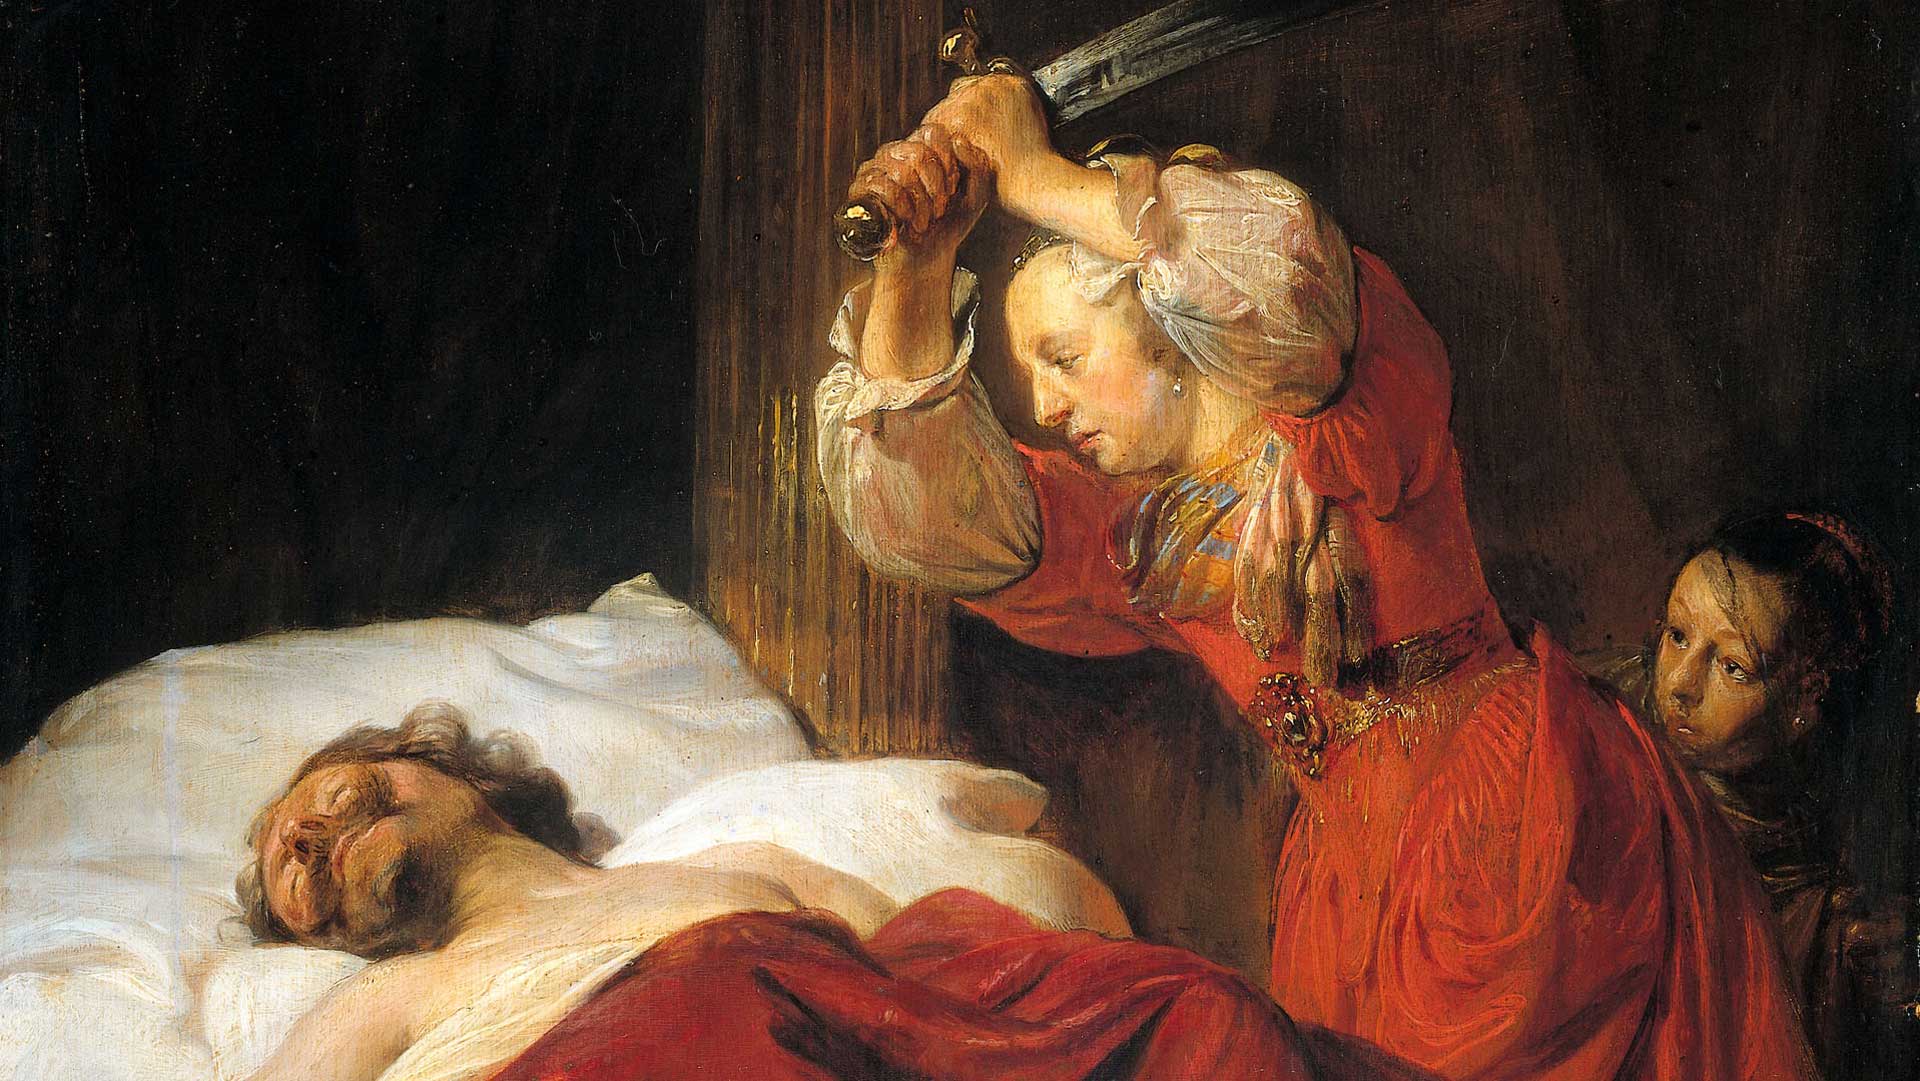 Judith and Holofernes by Jan de Bray. Image via Wikimedia Commons.